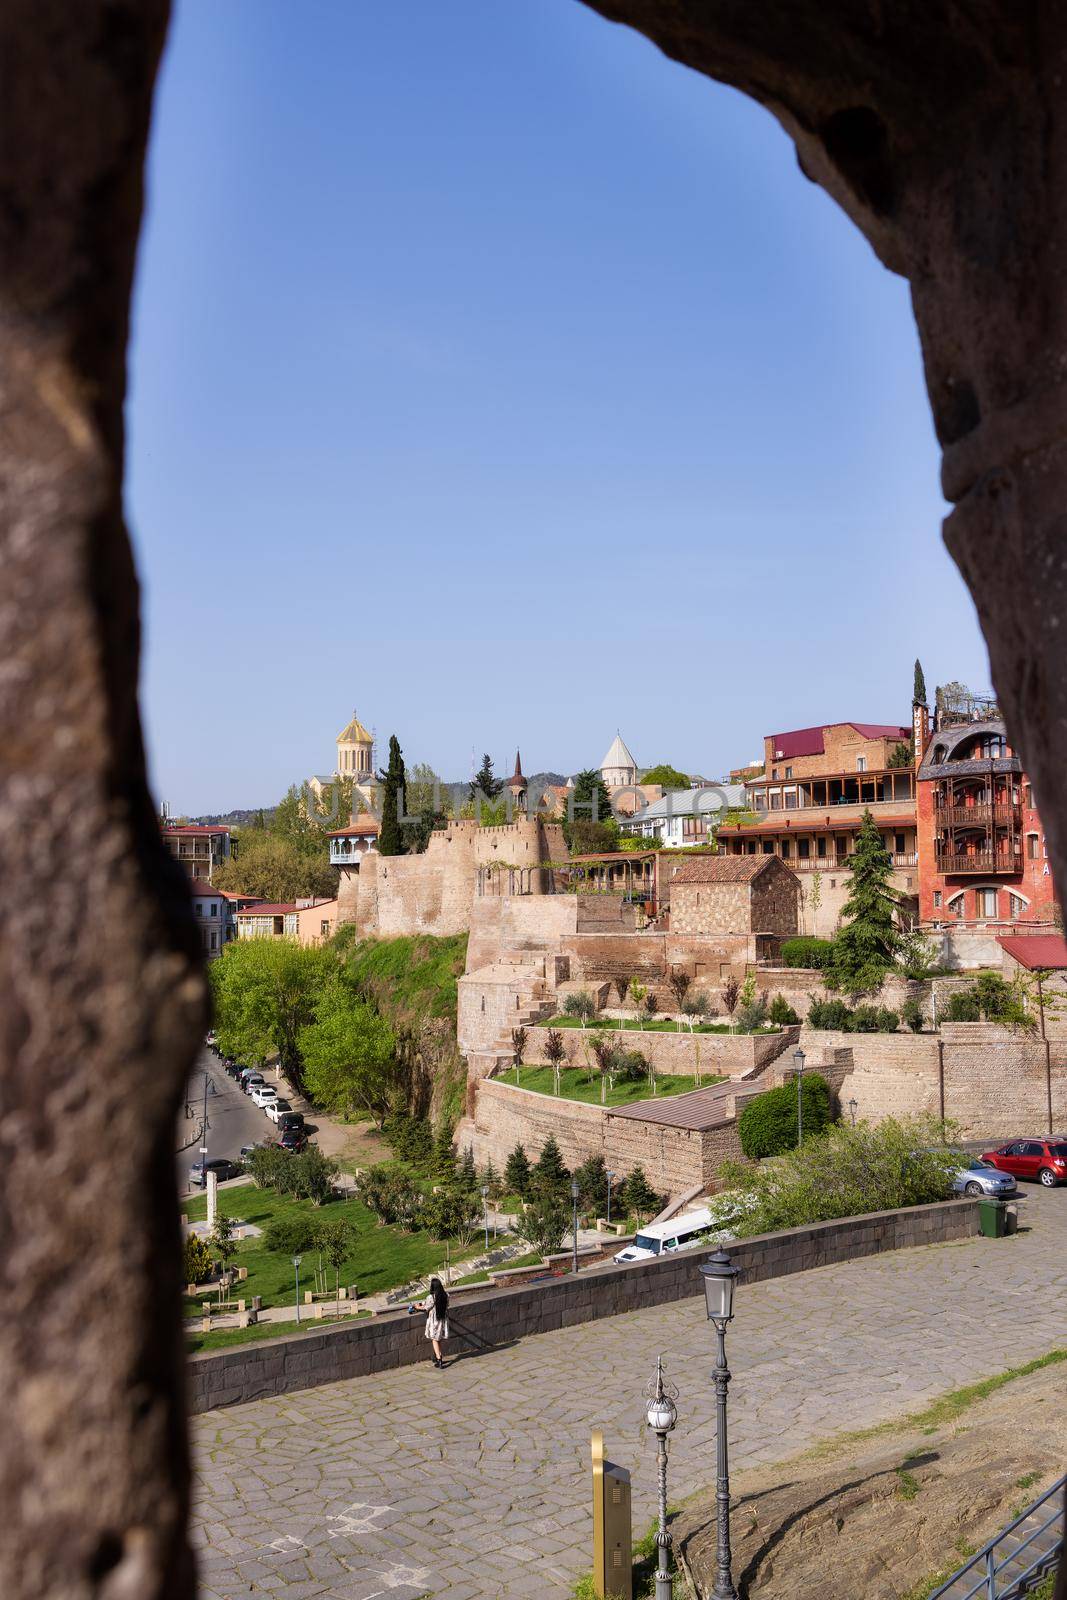 View of the old city of tbilisi through a round window in a thick stone wall